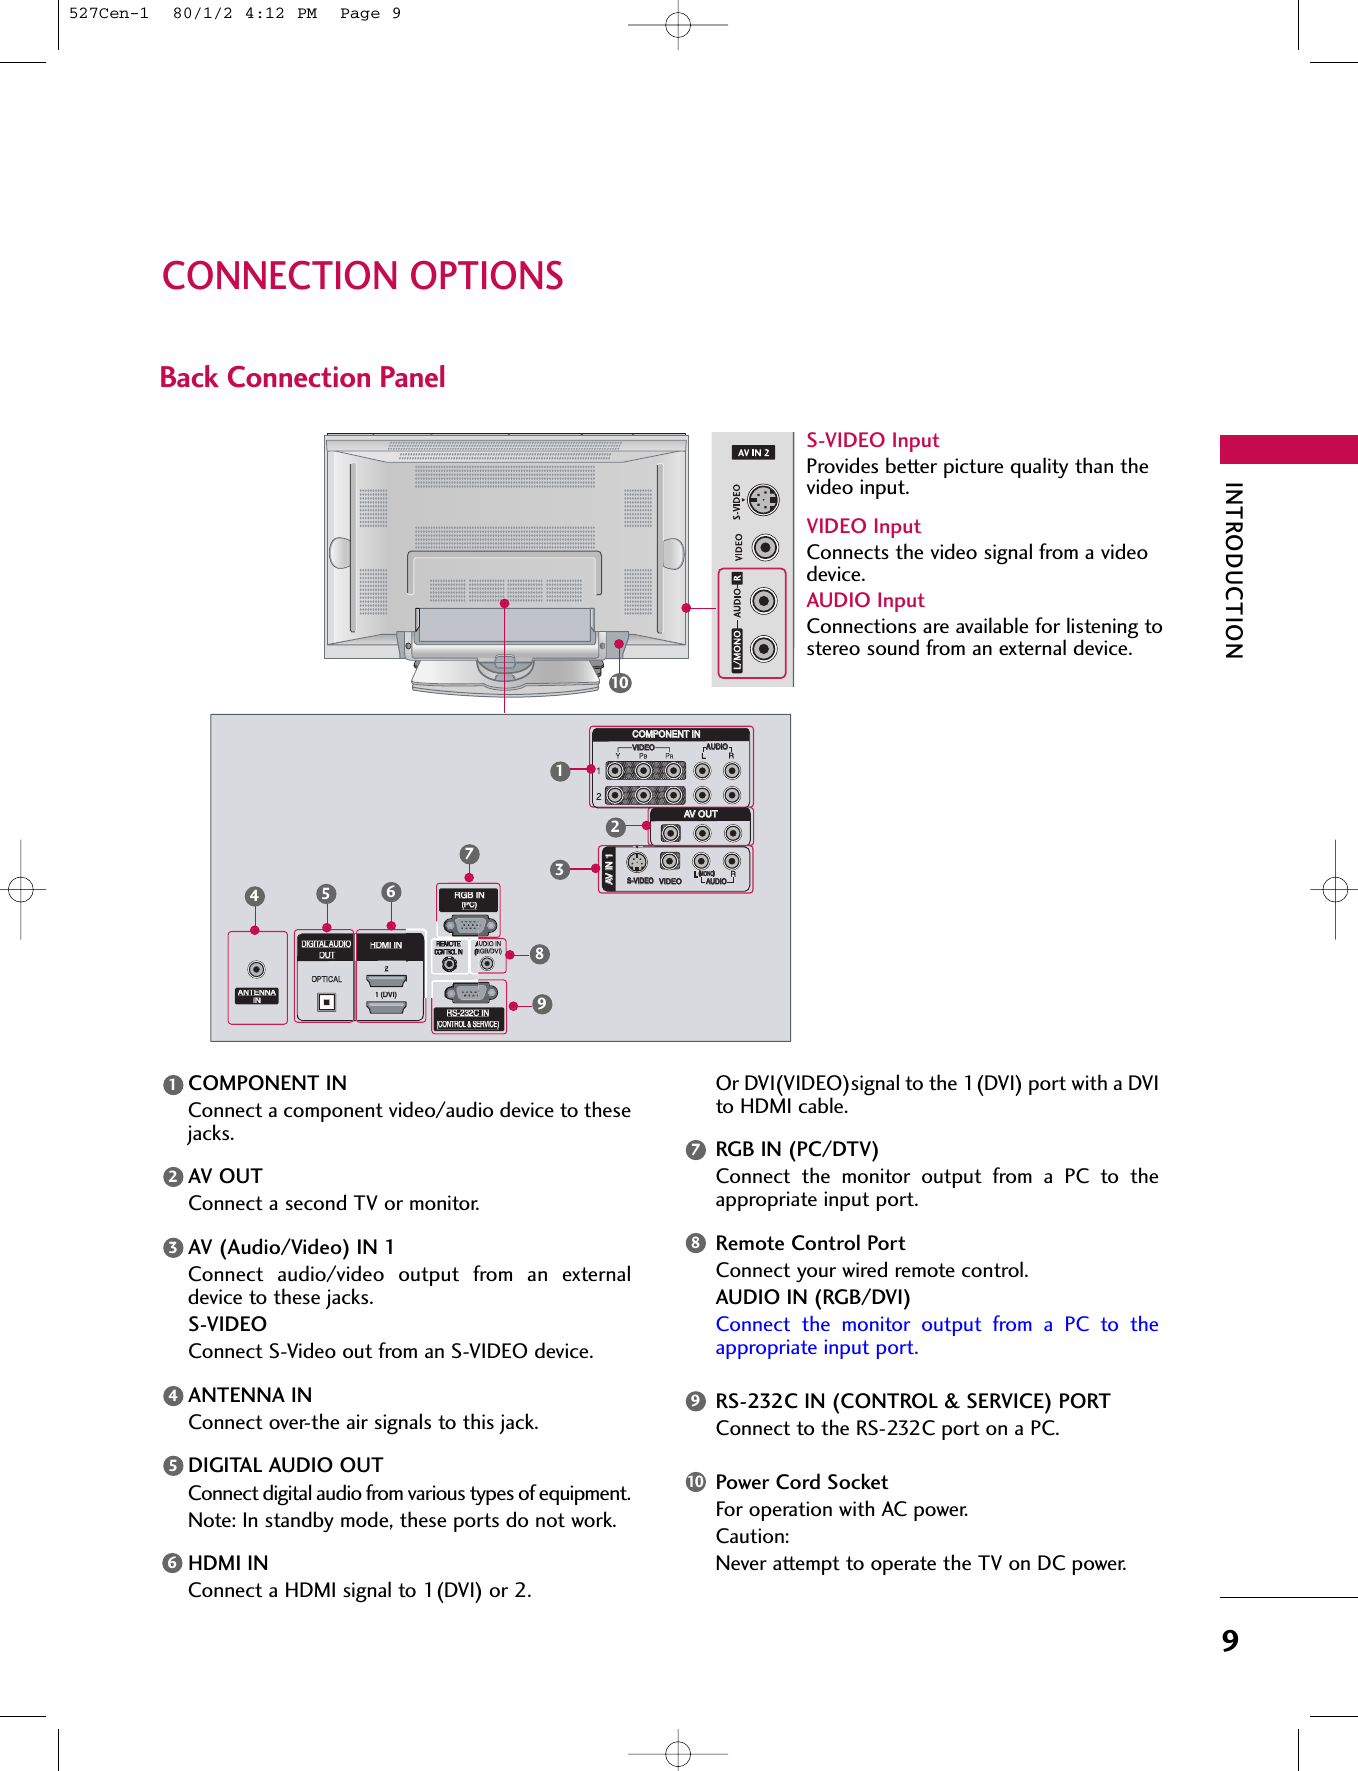 INTRODUCTION9CONNECTION OPTIONSBack Connection PanelVIDEOAUDIOVIDEOAUDIO(            )S-VIDEOAV IN 1AV OUTCOMPONENT INDIGITAL AUDIOOUTOHDMI IN21 (DVI)VIDEOVIDEOAUDIOAUDIOVIDEOVIDEOAUDIOAUDIOMONO(                        )S-VIDEOS-VIDEOAV IN 1AV IN 1AV OUTAV OUTANTENNAINRS-232C IN(CONTROL &amp; SERVICE)RGB IN(PC)COMPONENT INCOMPONENT INS-VIDEO InputProvides better picture quality than thevideo input.VIDEO InputConnects the video signal from a videodevice.AUDIO InputConnections are available for listening tostereo sound from an external device.COMPONENT INConnect a component video/audio device to thesejacks.AV OUTConnect a second TV or monitor.AV (Audio/Video) IN 1  Connect  audio/video  output  from  an  externaldevice to these jacks.S-VIDEO Connect S-Video out from an S-VIDEO device.ANTENNA INConnect over-the air signals to this jack.DIGITAL AUDIO OUTConnect digital audio from various types of equipment. Note: In standby mode, these ports do not work.HDMI INConnect a HDMI signal to 1(DVI) or 2.Or DVI(VIDEO)signal to the 1(DVI) port with a DVIto HDMI cable.RGB IN (PC/DTV)Connect  the  monitor  output  from  a  PC  to  theappropriate input port.Remote Control PortConnect your wired remote control.AUDIO IN (RGB/DVI)Connect  the  monitor  output  from  a  PC  to  theappropriate input port.RS-232C IN (CONTROL &amp; SERVICE) PORTConnect to the RS-232C port on a PC.Power Cord SocketFor operation with AC power. Caution: Never attempt to operate the TV on DC power.1241678910234556783910527Cen-1  80/1/2 4:12 PM  Page 9